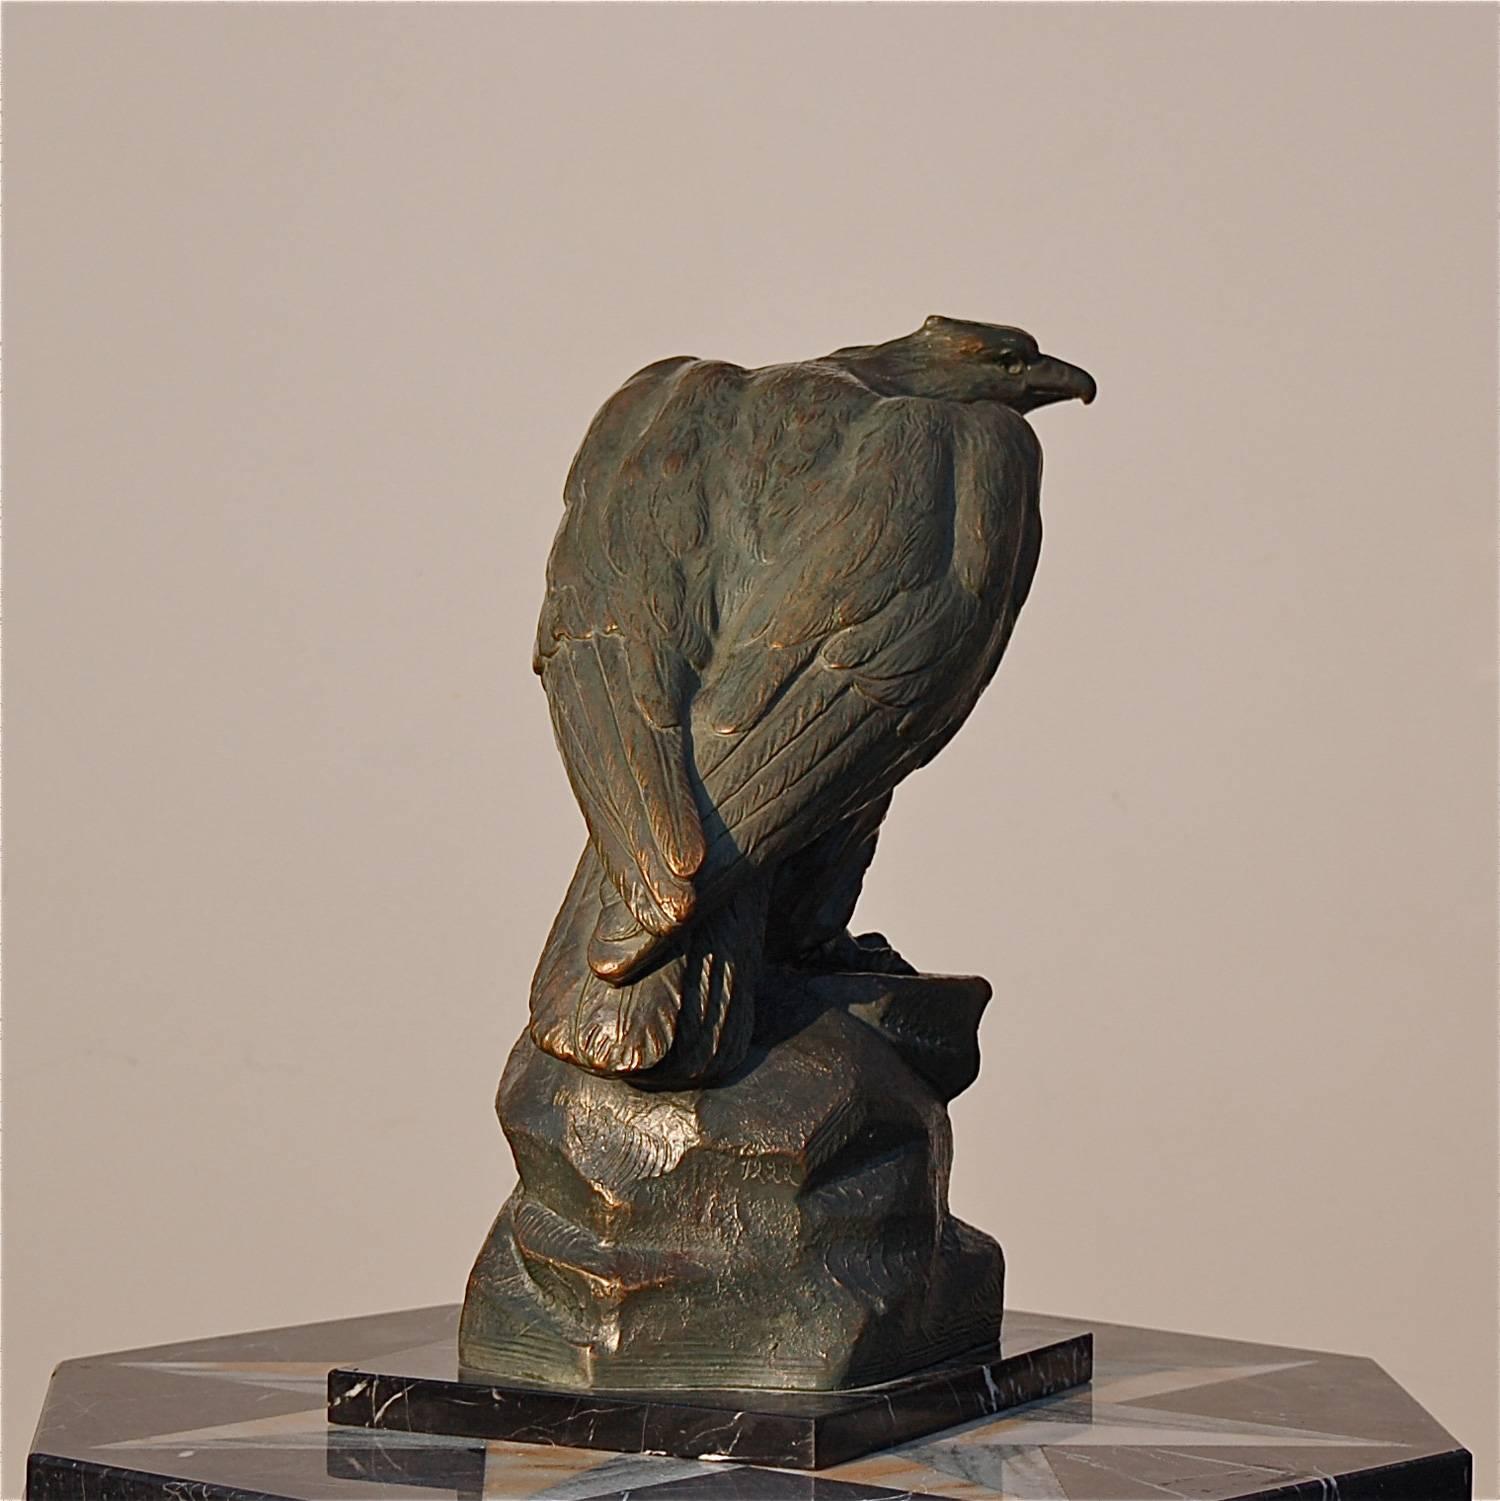 Early 20th century statue of a characterful eagle resting on a rock. The artist crafted the bird of prey from terracotta or plaster which was subsequently professionally patinated to match or mimic bronze. Numbered, but unclearly signed. The statue